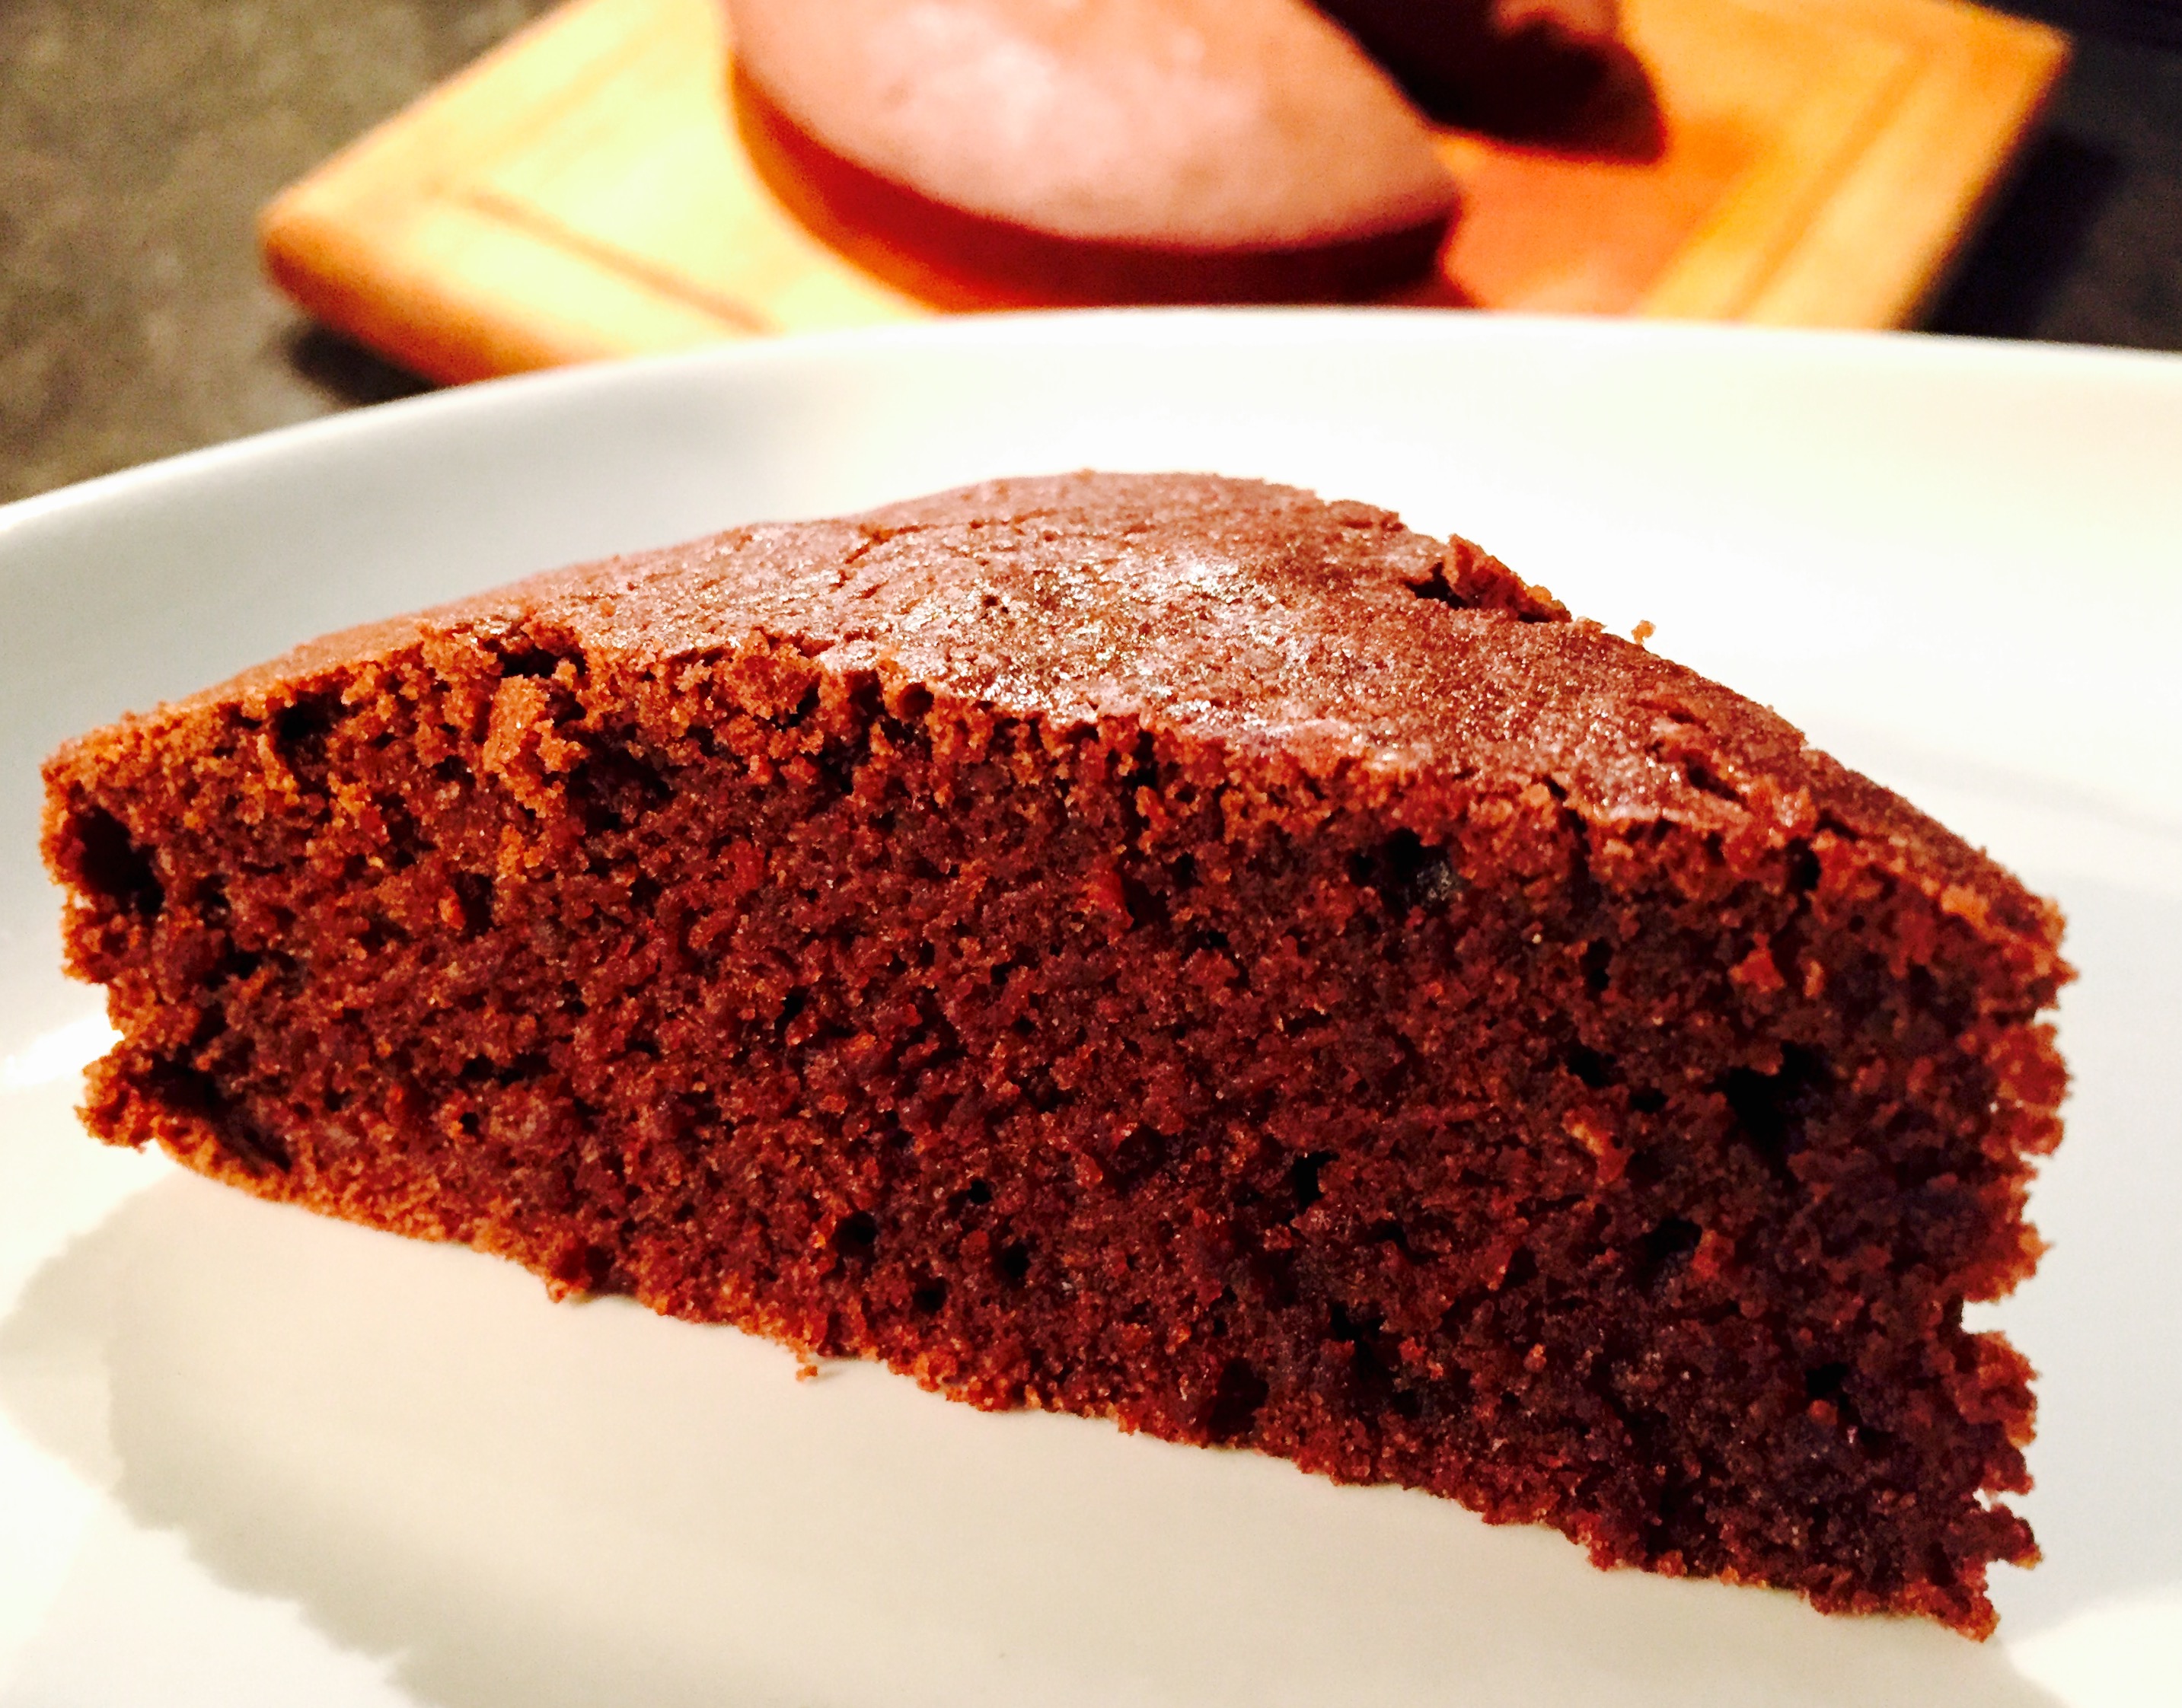 Our very best gluten free cake recipe, moist, delicious ... and most of all it tastes like delicious cake, not gluten free cake